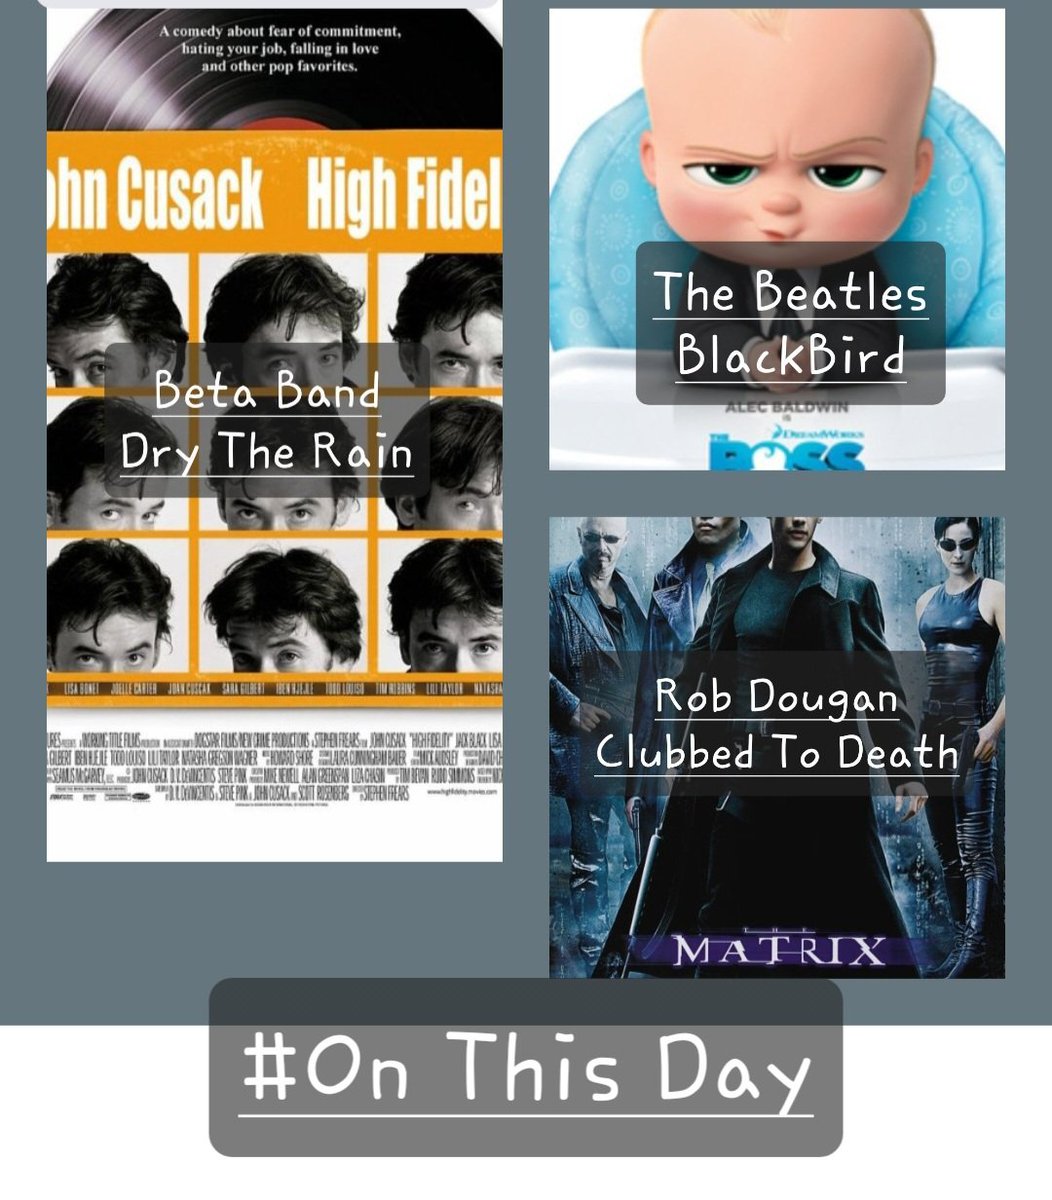 Playing now on @cragsradio it's #Onthisday and I have 3 tracks from Three #Films that were released on this day 1st up is The Beta Band with Dry The Rain then it's the Beatles with Blackbird ending with Rob Dougan with Clubbed to Death From #HighFidelty, #BossBaby and #TheMatrix.